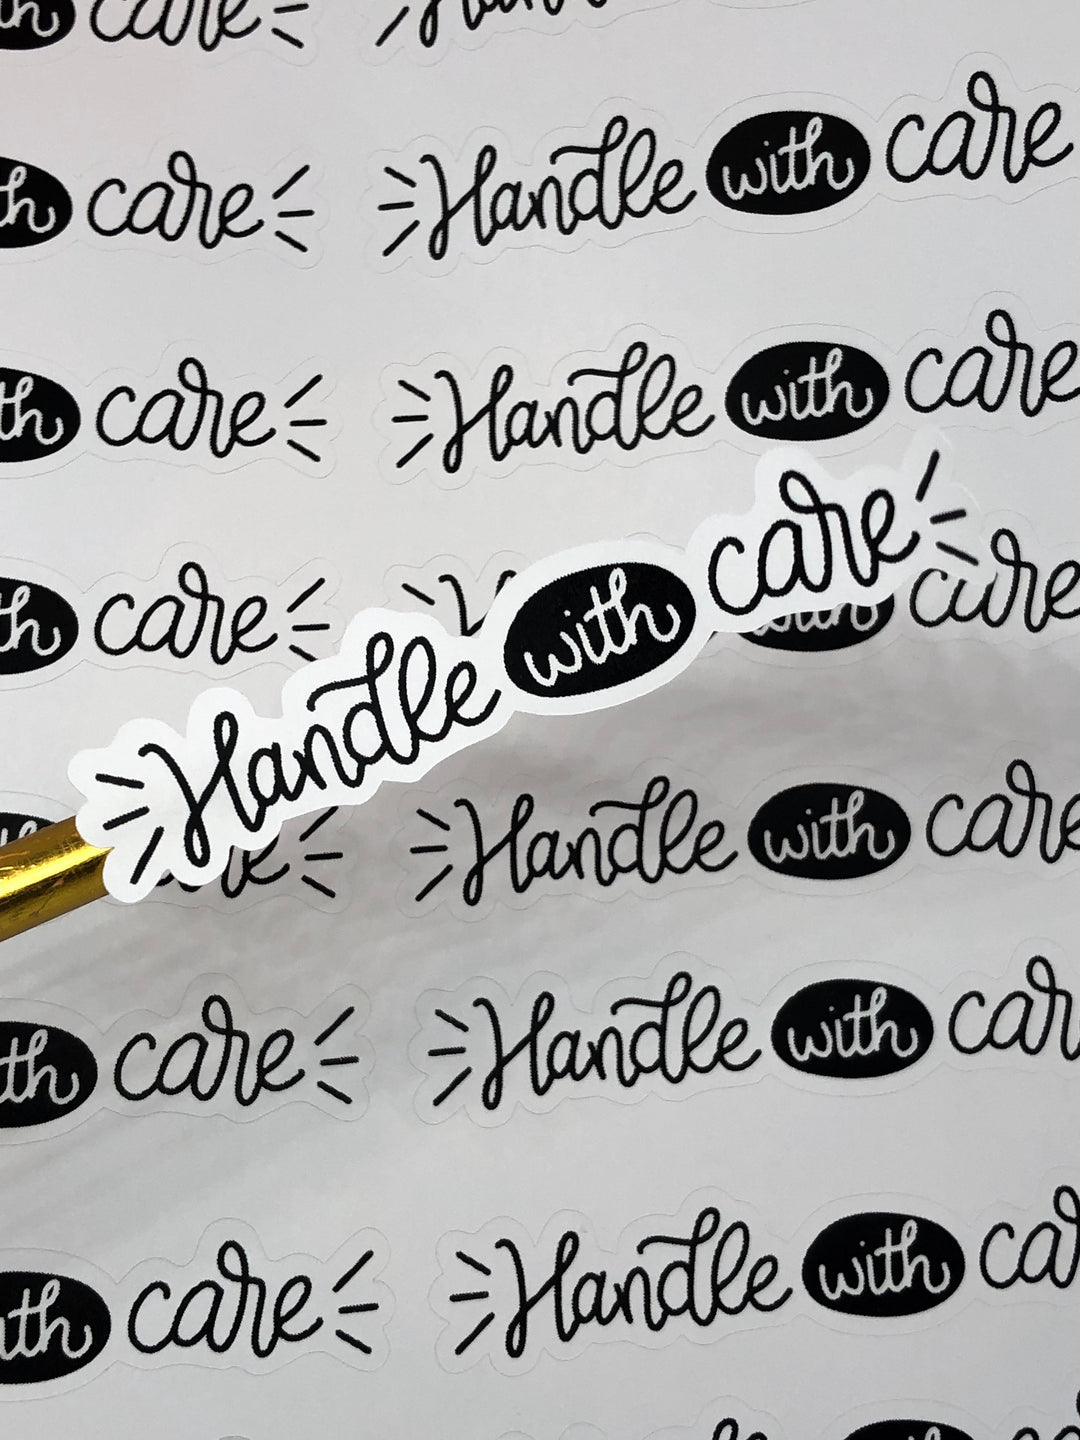 Handle With Care | Packaging Stickers | Business Branding | Small Shop Happy Mail Stickers | Matte Sticker | SIZE 2.5 X 1 INCHES